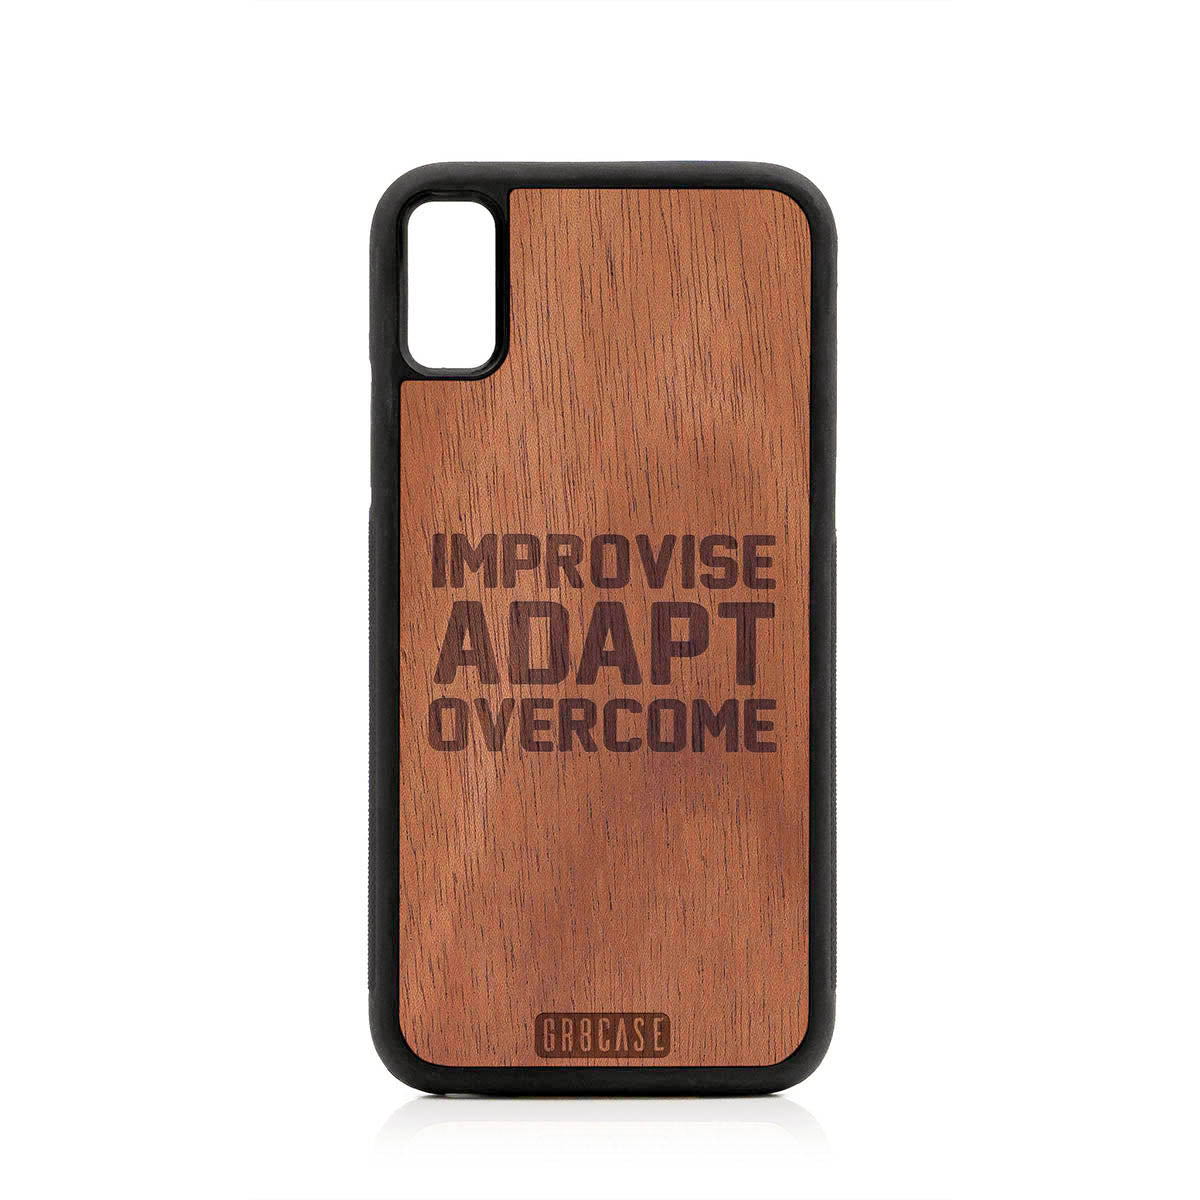 Improvise Adapt Overcome Design Wood Case For iPhone X/XS